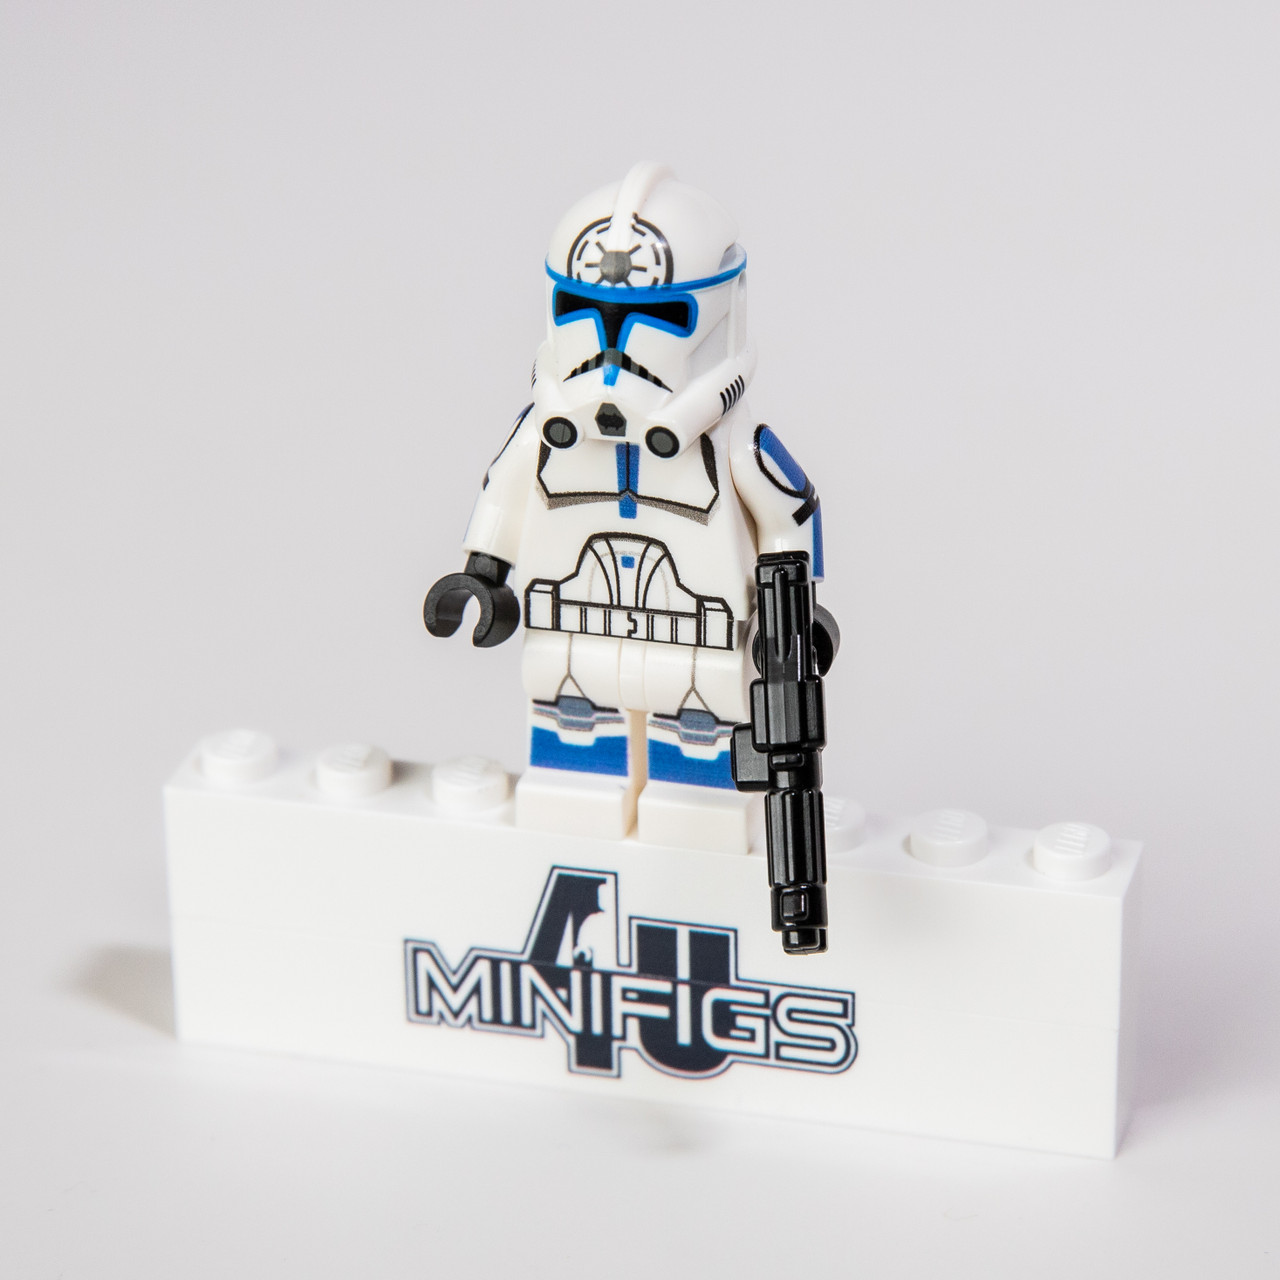 NEW STAR WARS JESSE CLONE TROOPER PLAY WITH LEGO MINIFIGURE USA SELLER 